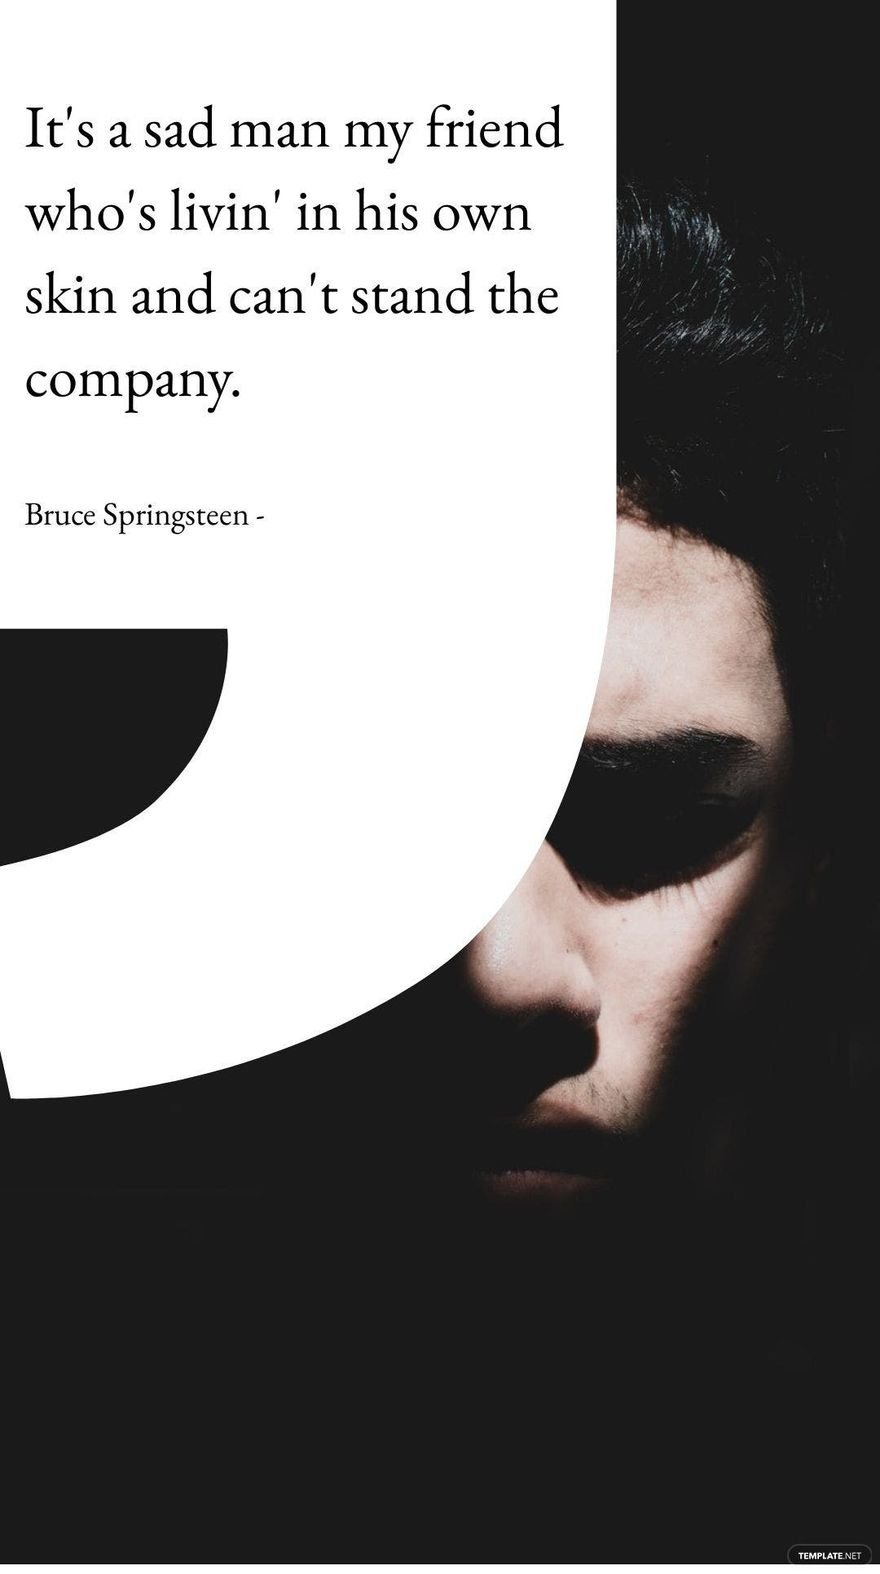 Bruce Springsteen - It's a sad man my friend who's livin' in his own skin and can't stand the company.